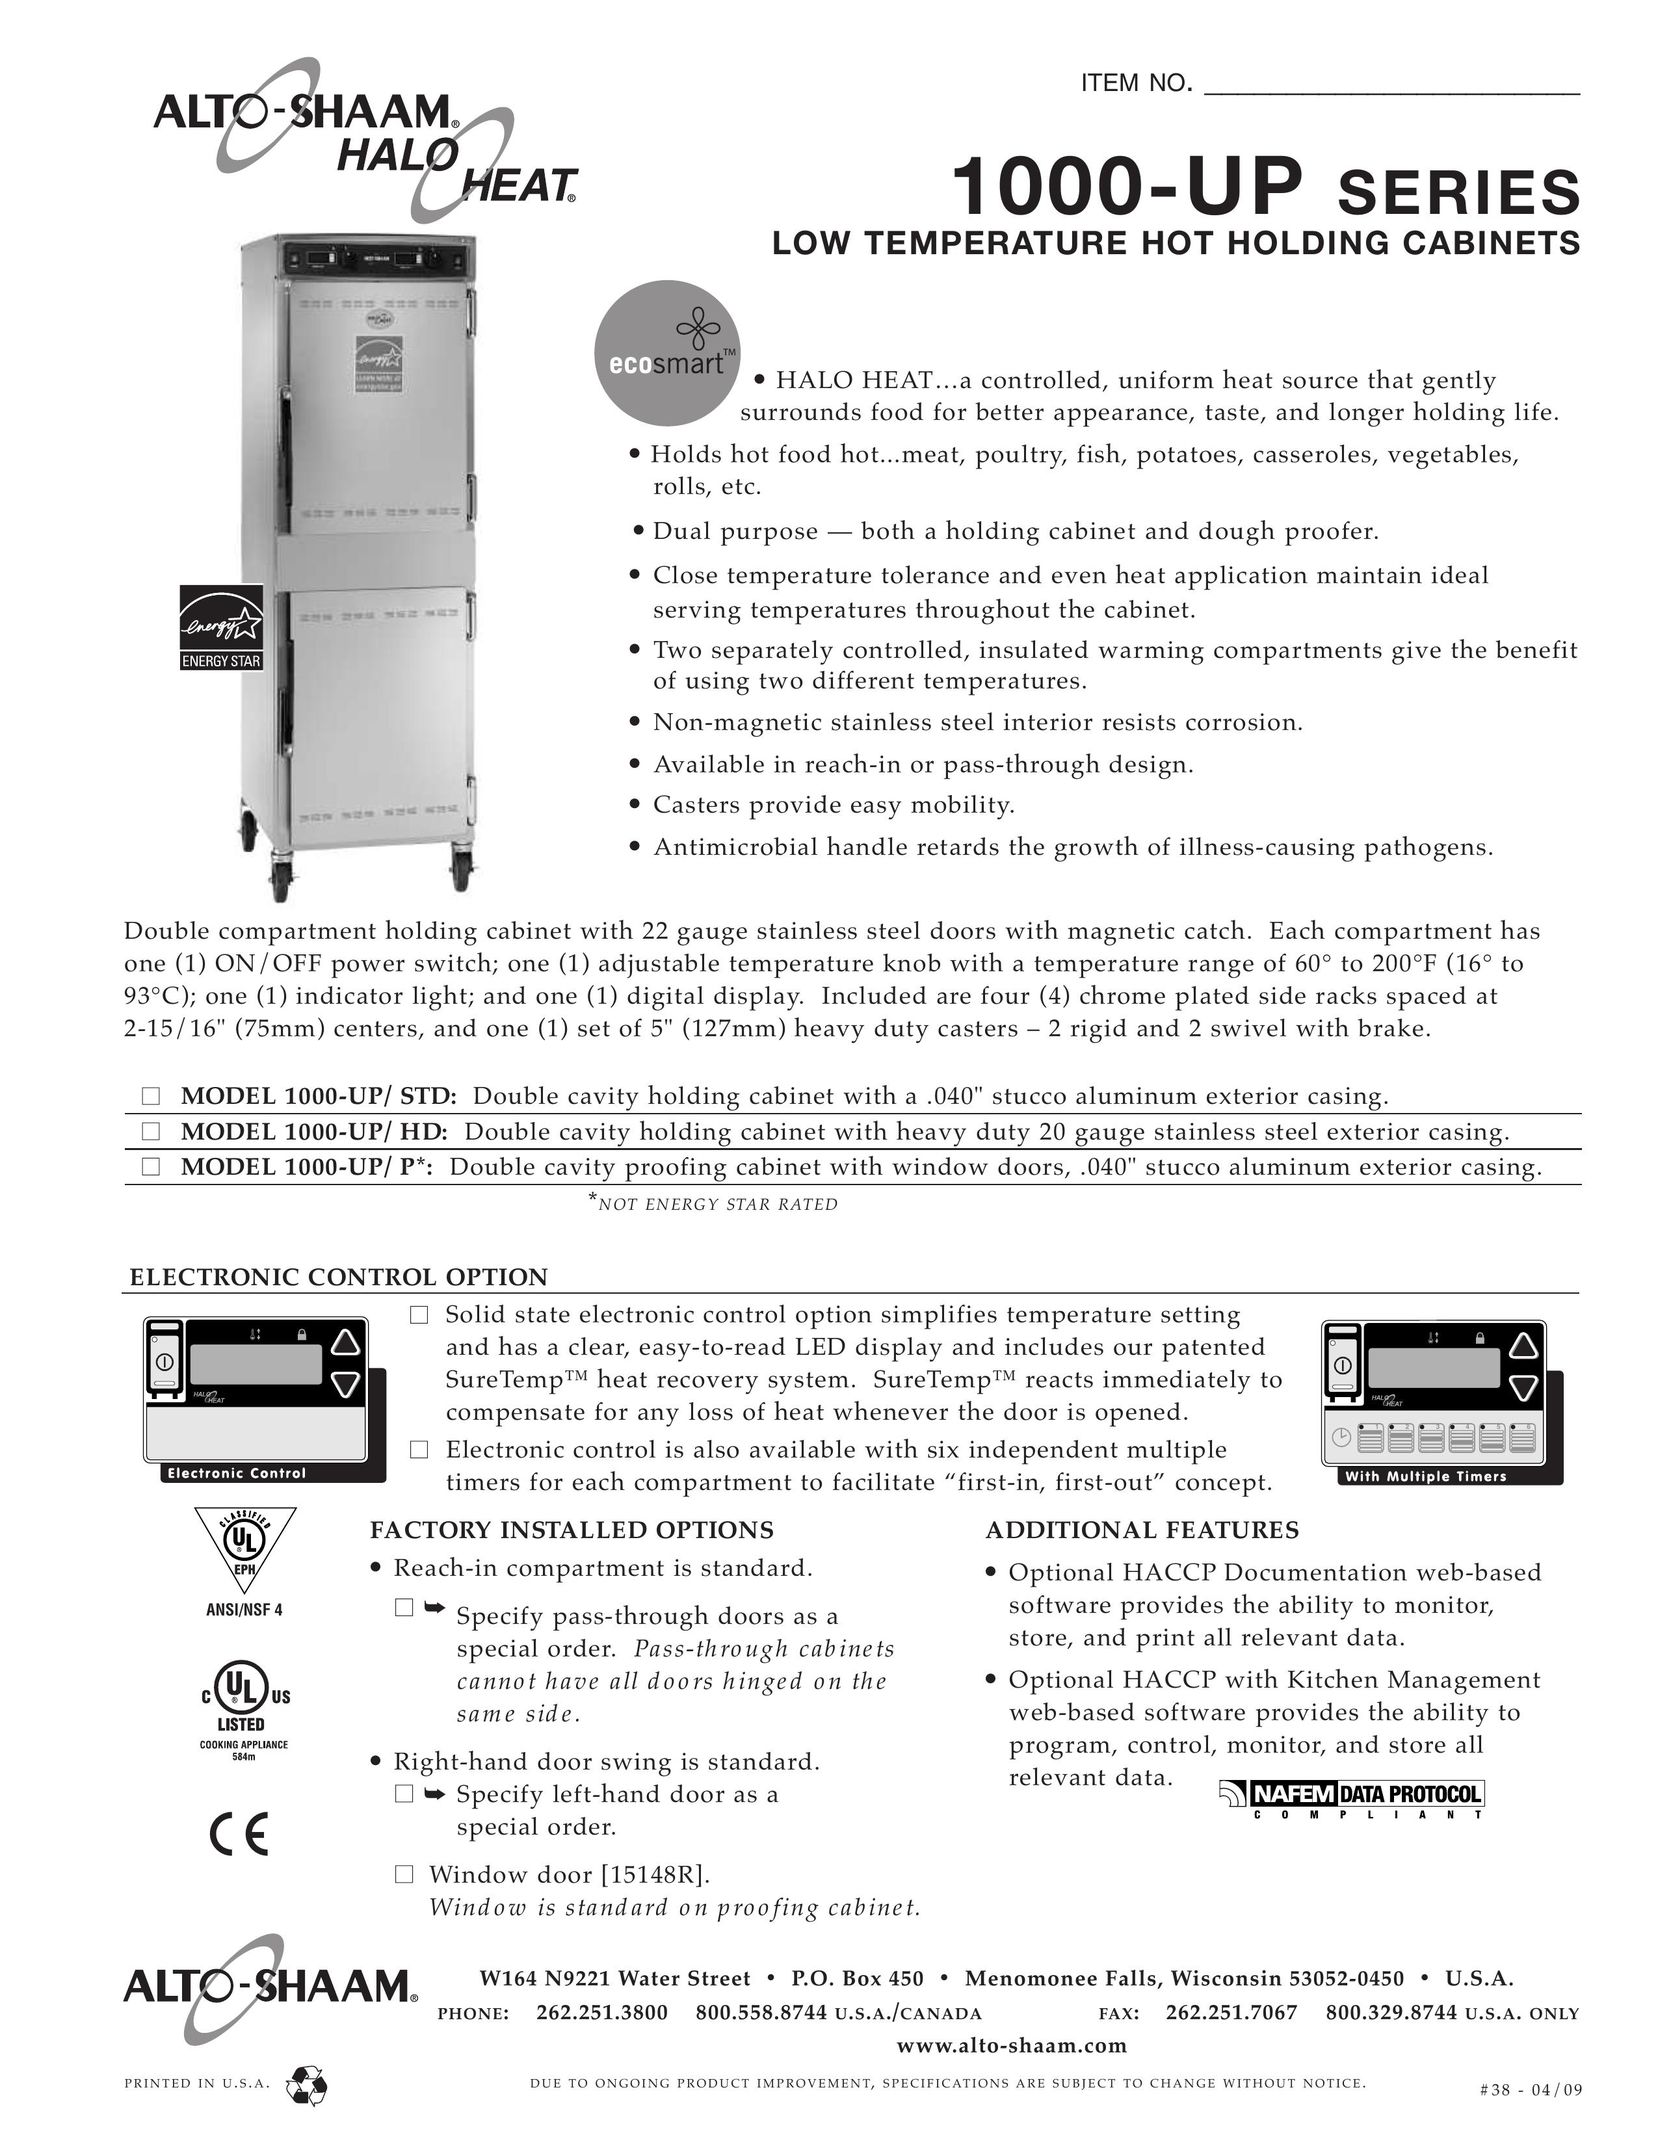 Alto-Shaam 1000-UP/ P* Oven User Manual